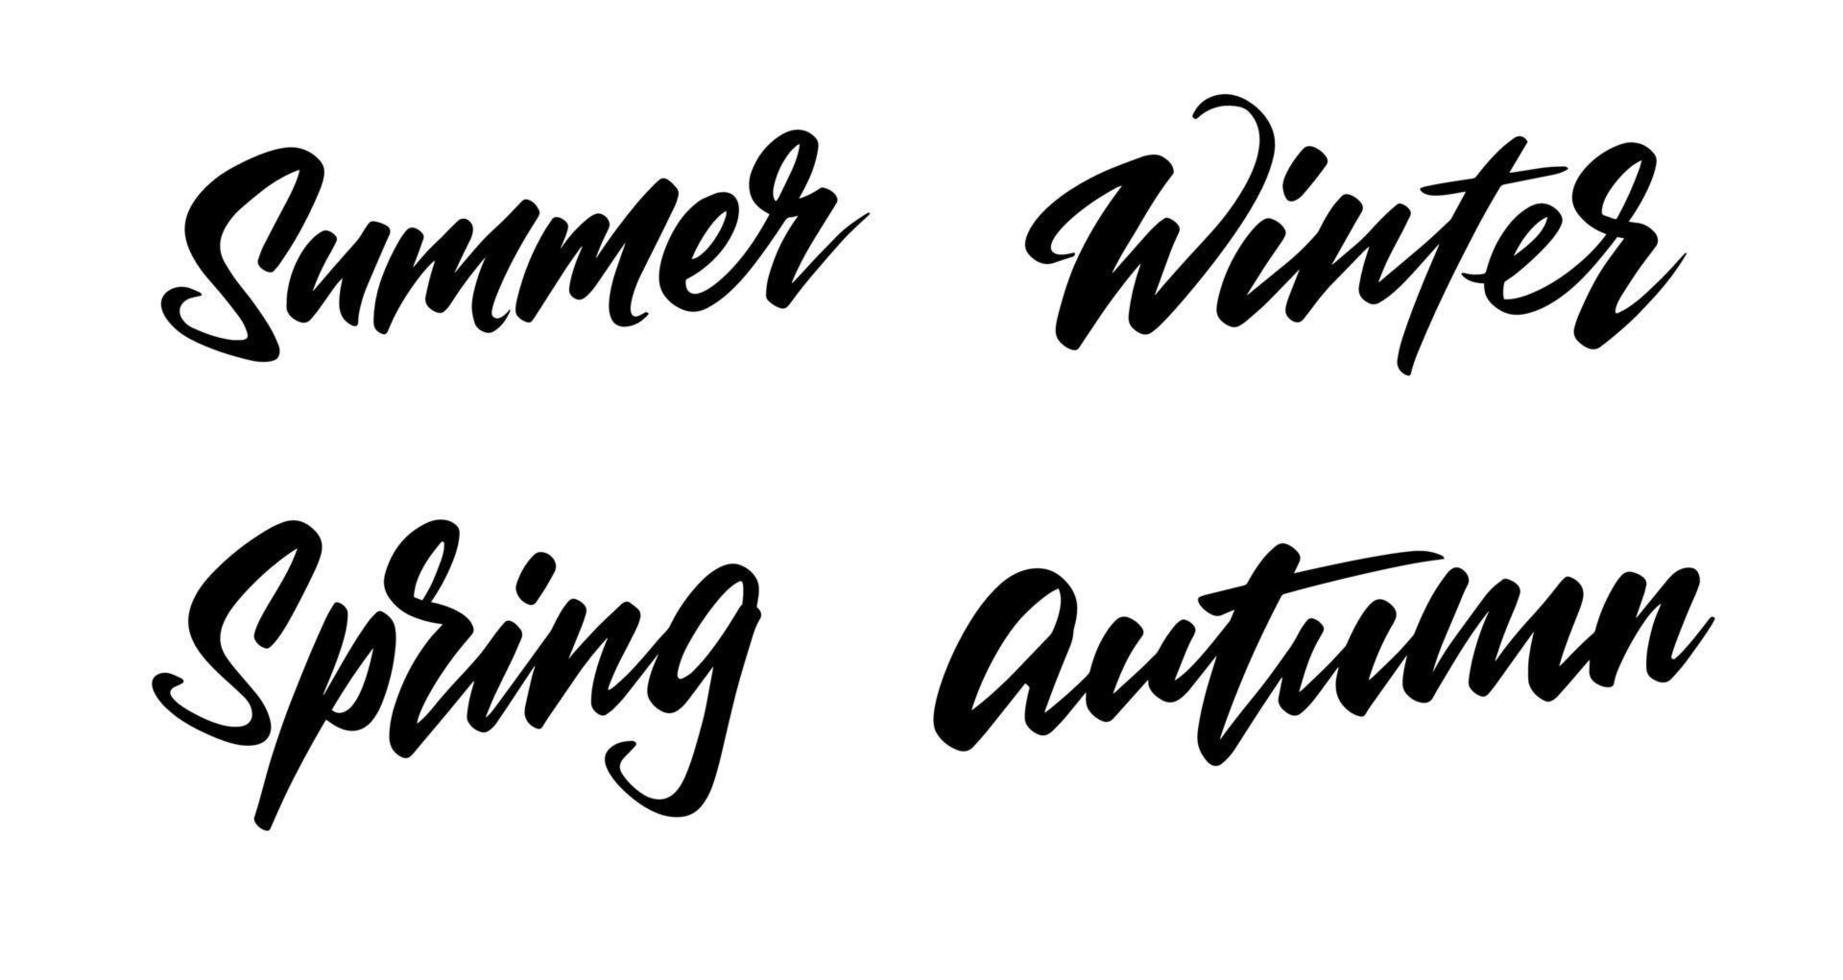 The inscriptions of the seasons in lettering style on a white background for printing and design. Vector illustration.